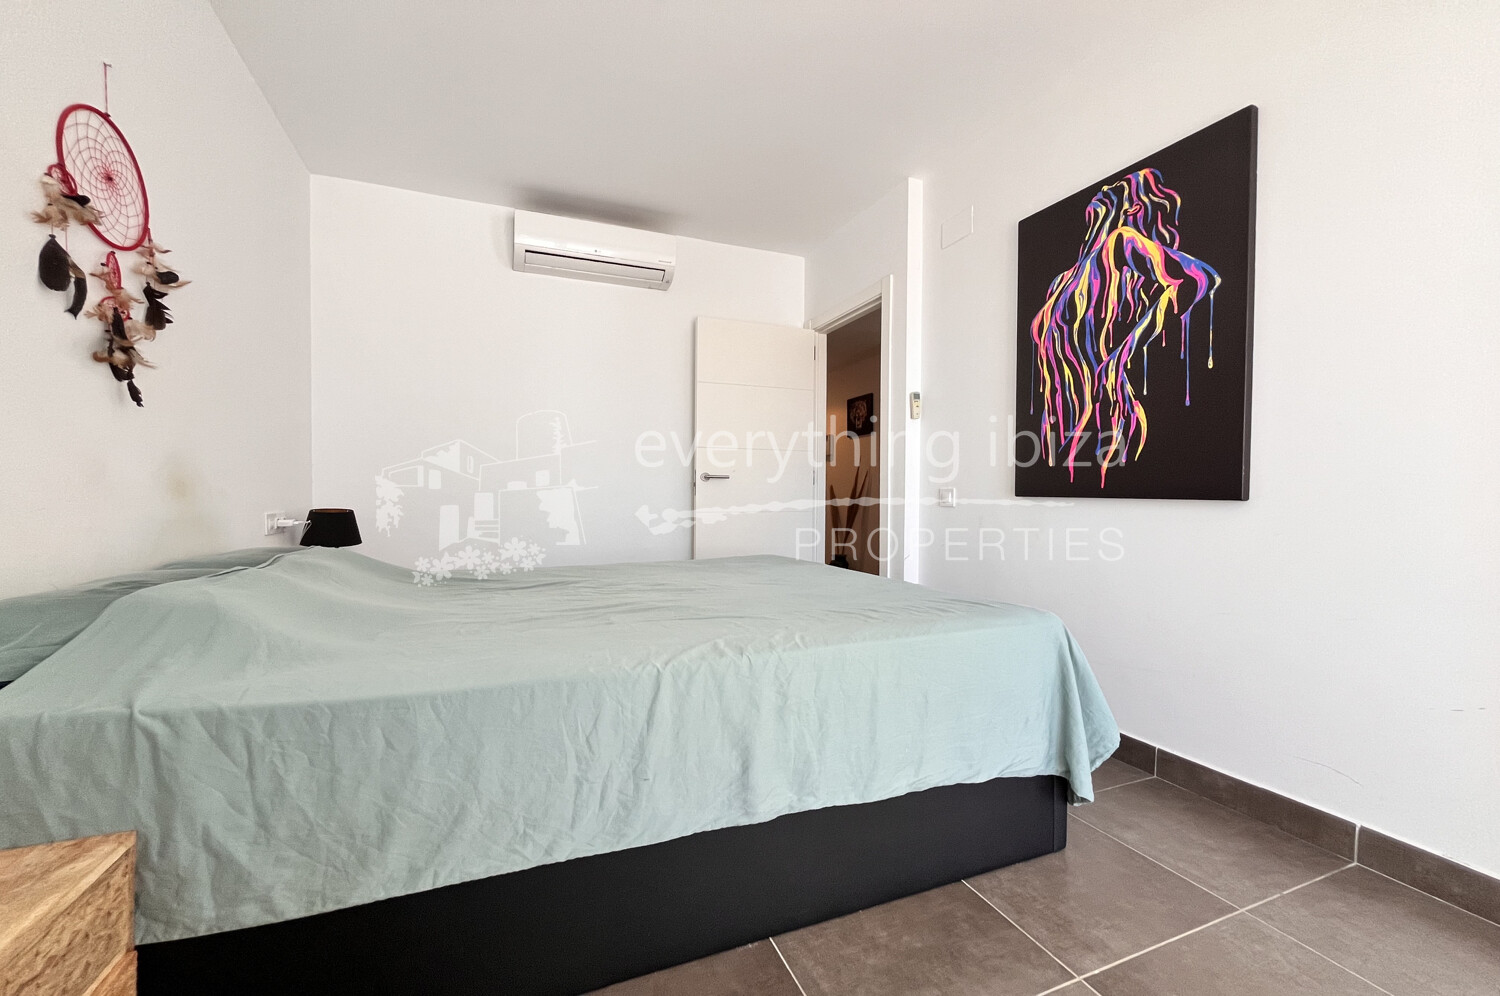 Modern Ground Floor Apartment Close to the Sea and Coastline, ref. 1693, for sale in Ibiza by everything ibiza Properties